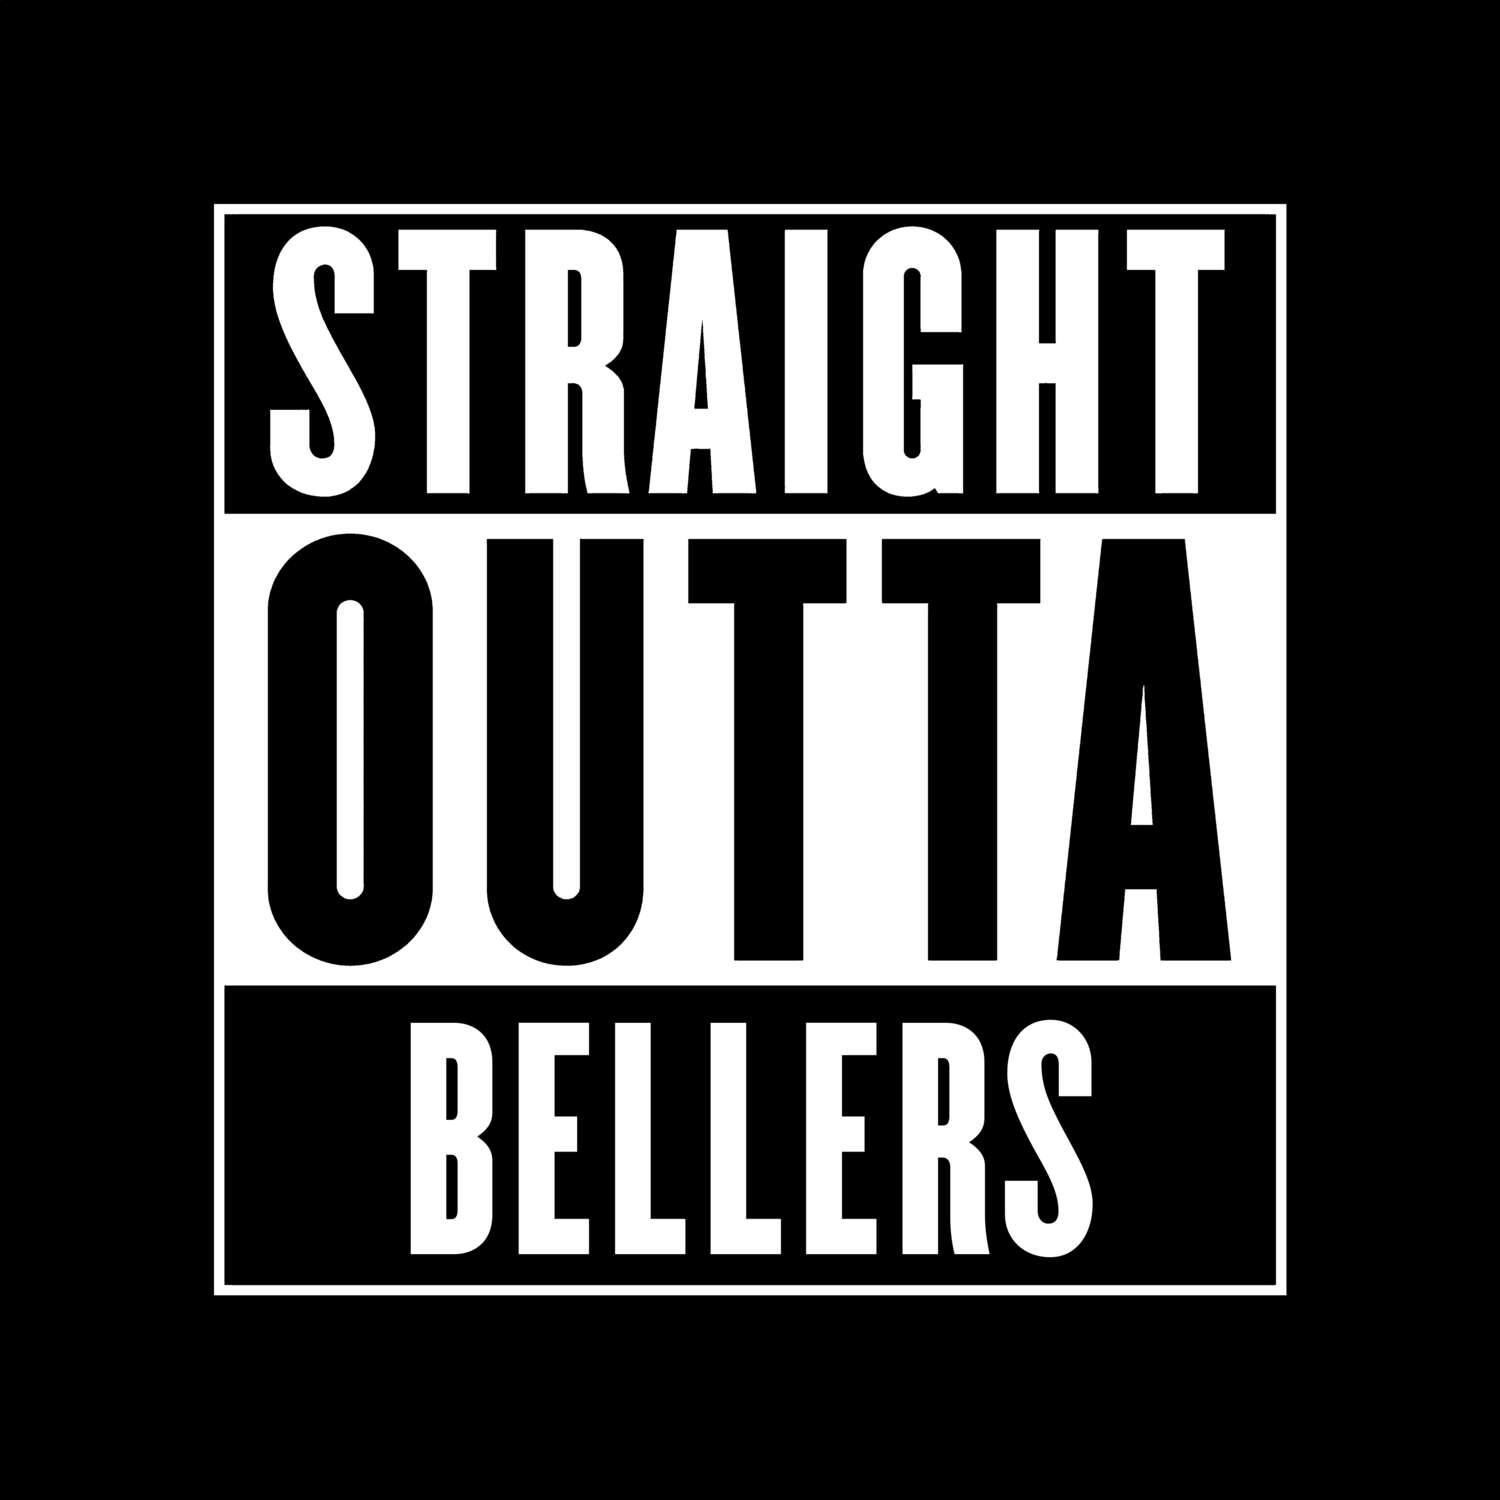 Bellers T-Shirt »Straight Outta«